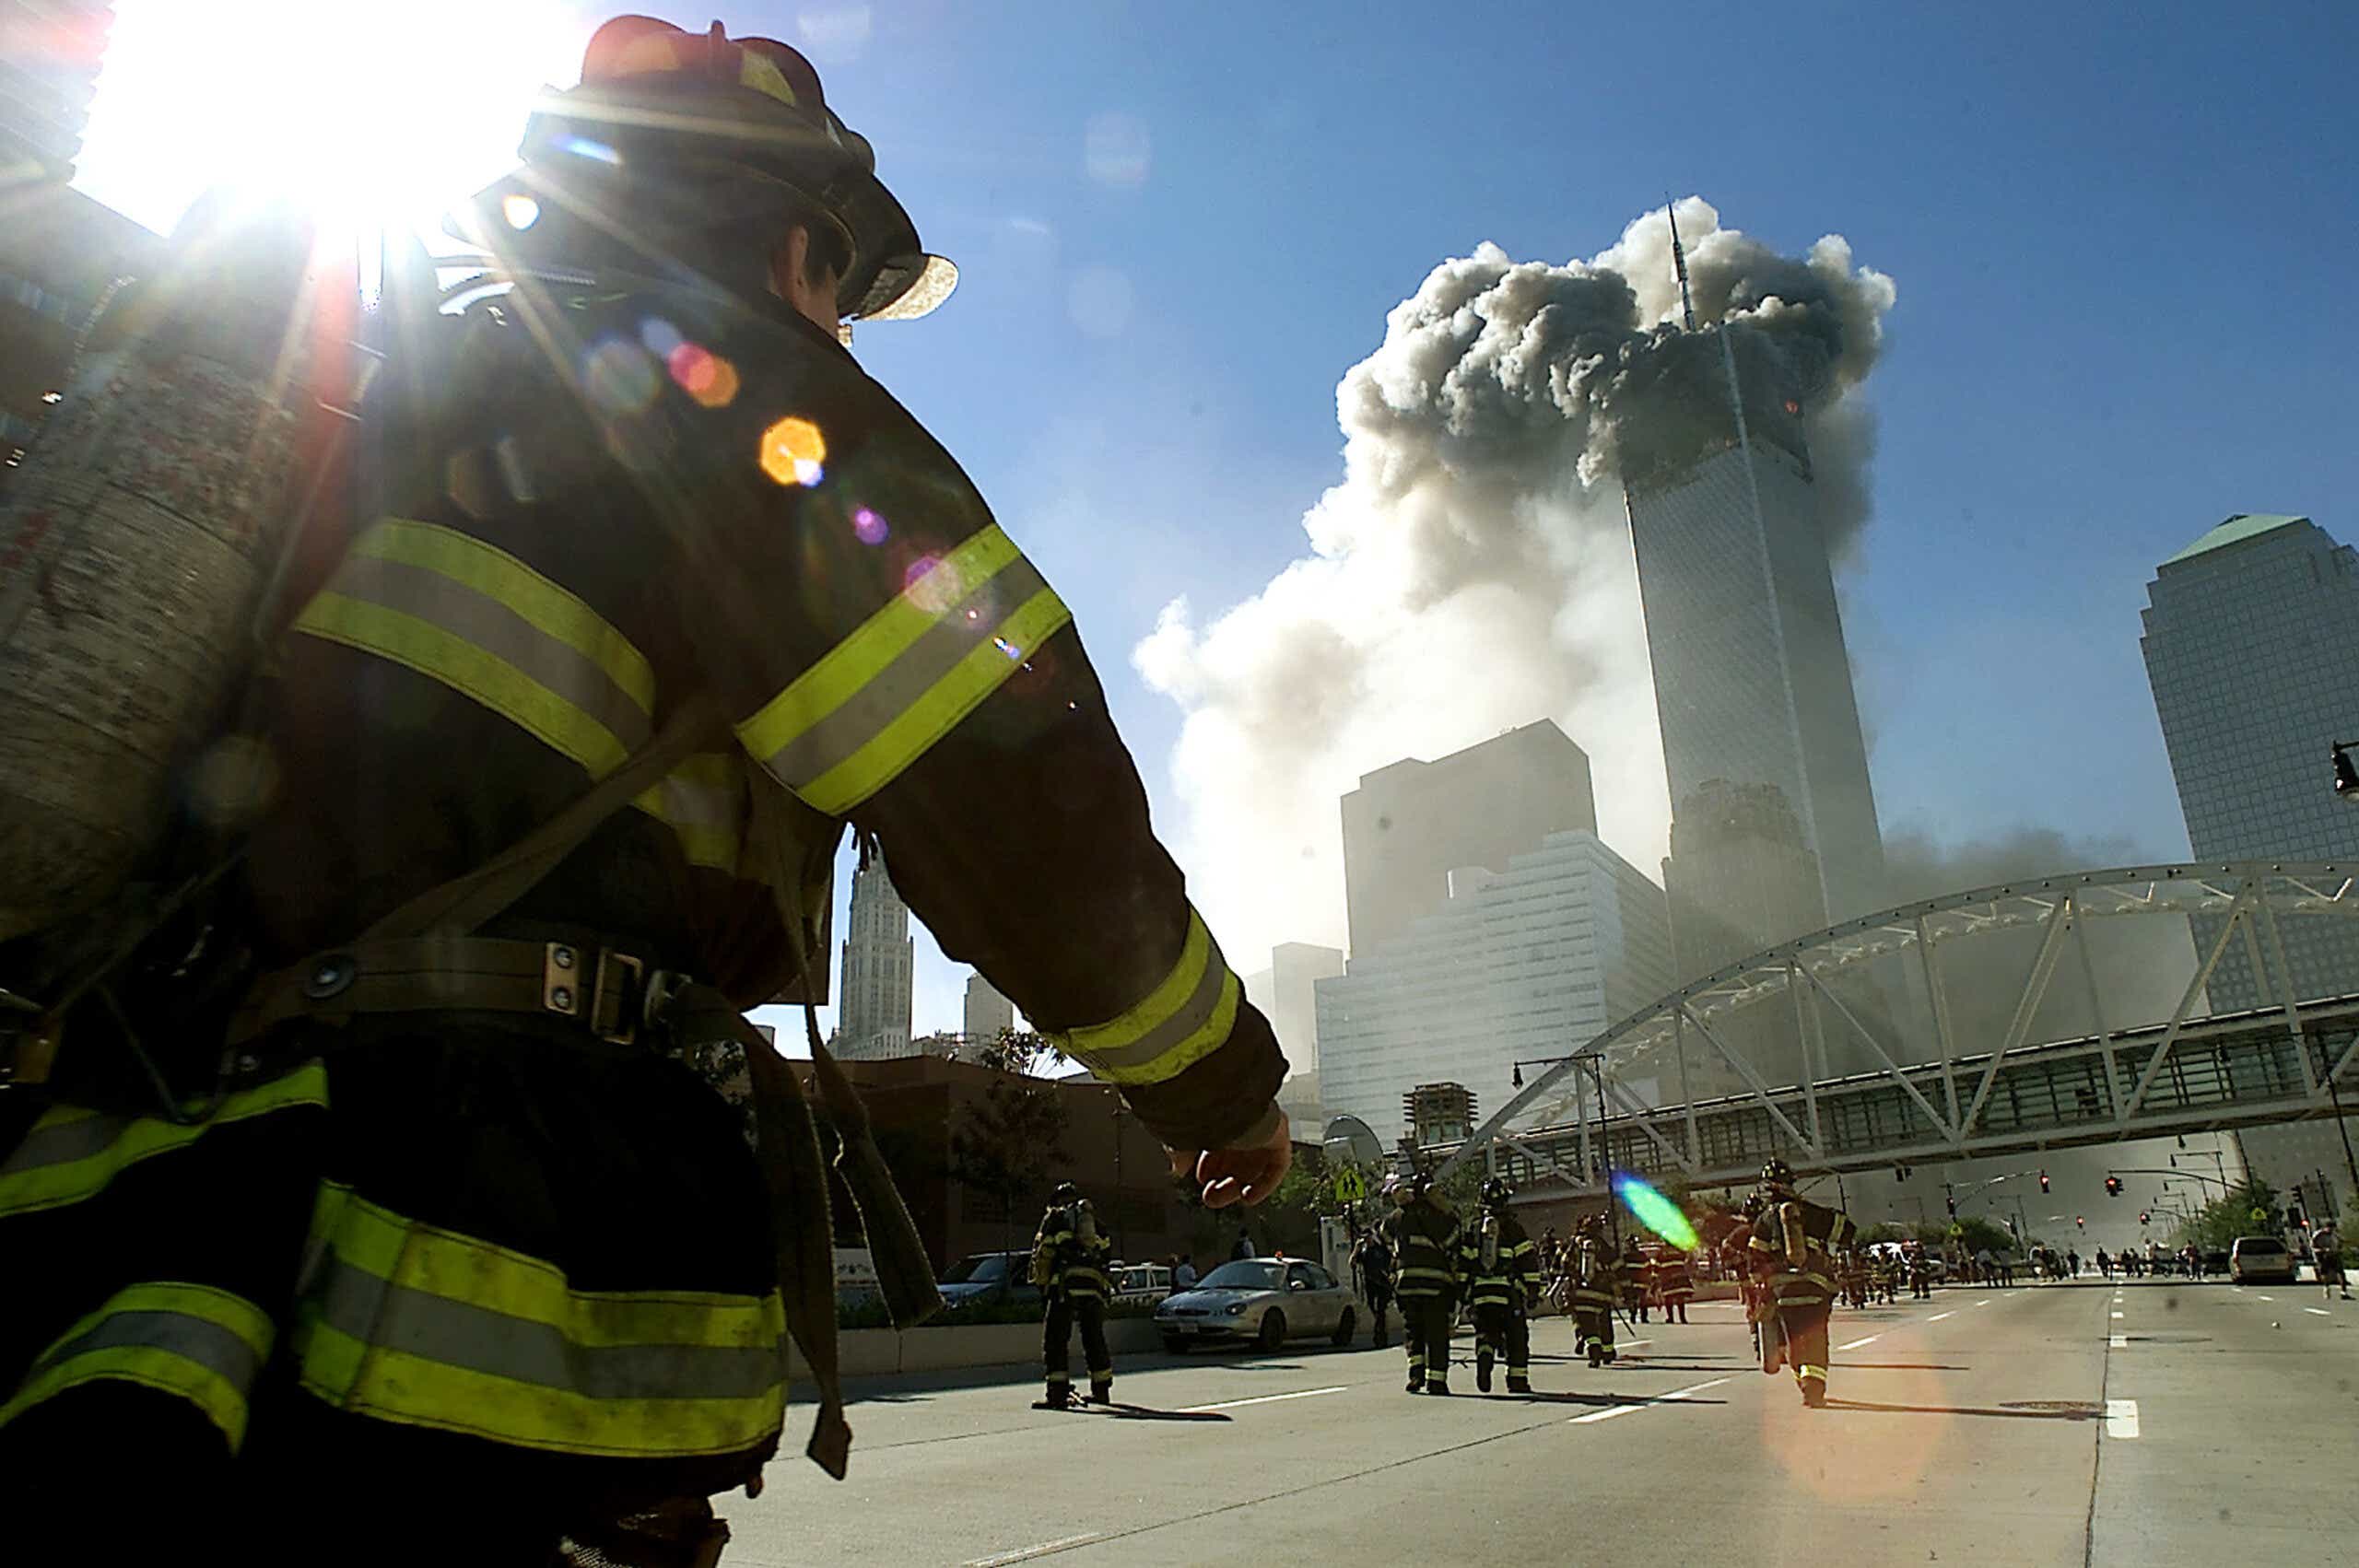 NYC Firefighter on 9/11